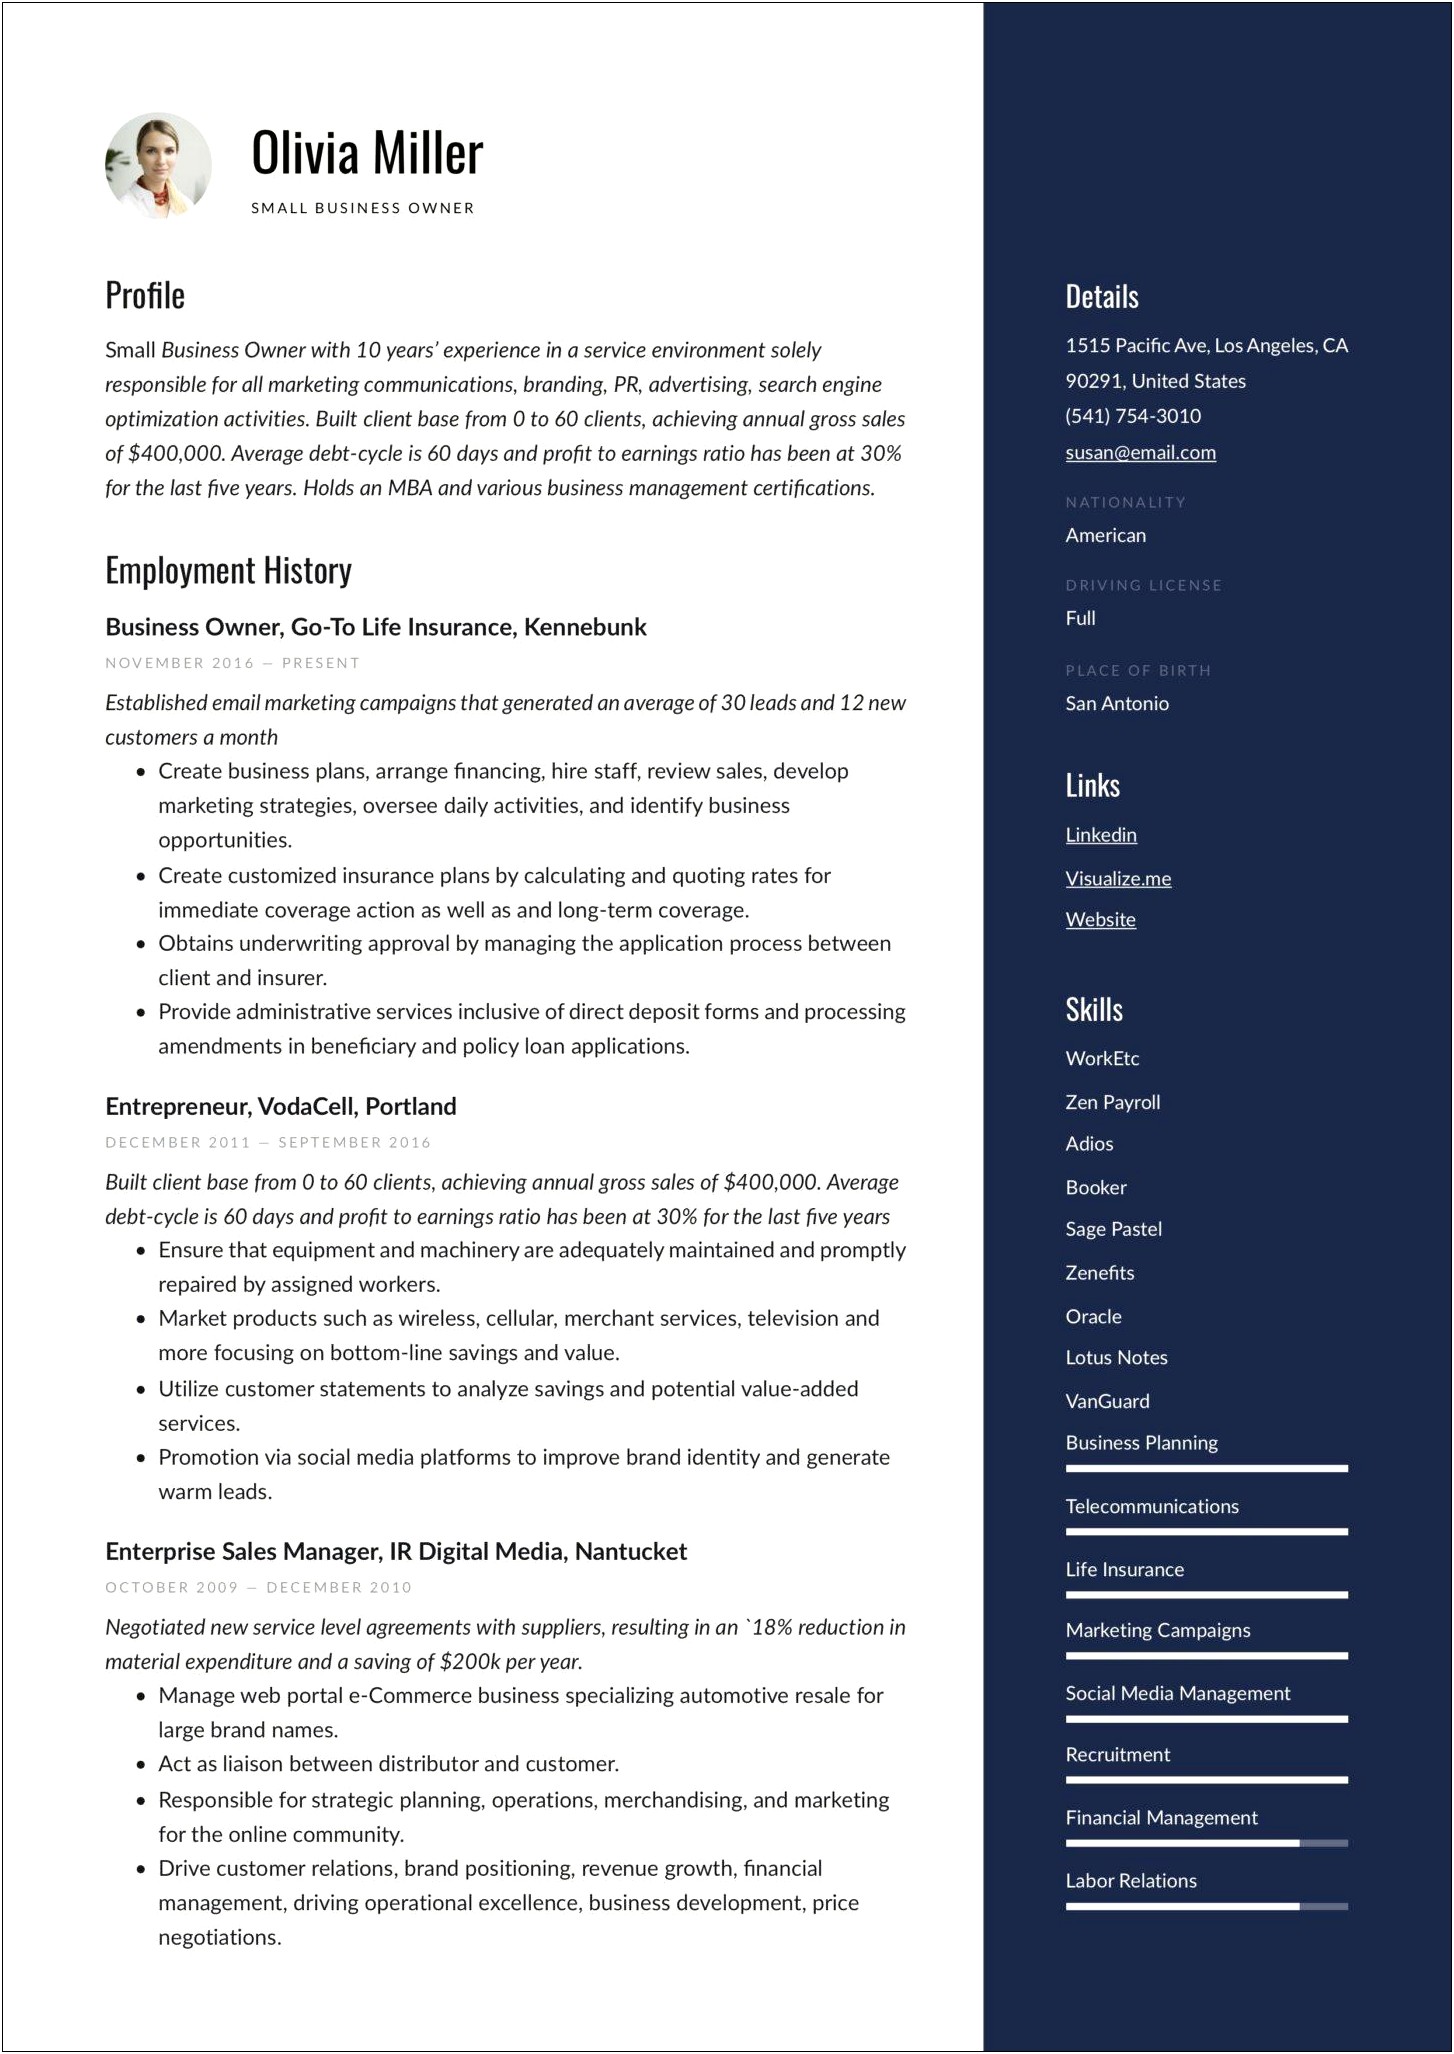 Resume Example Of Small Buisness Owner